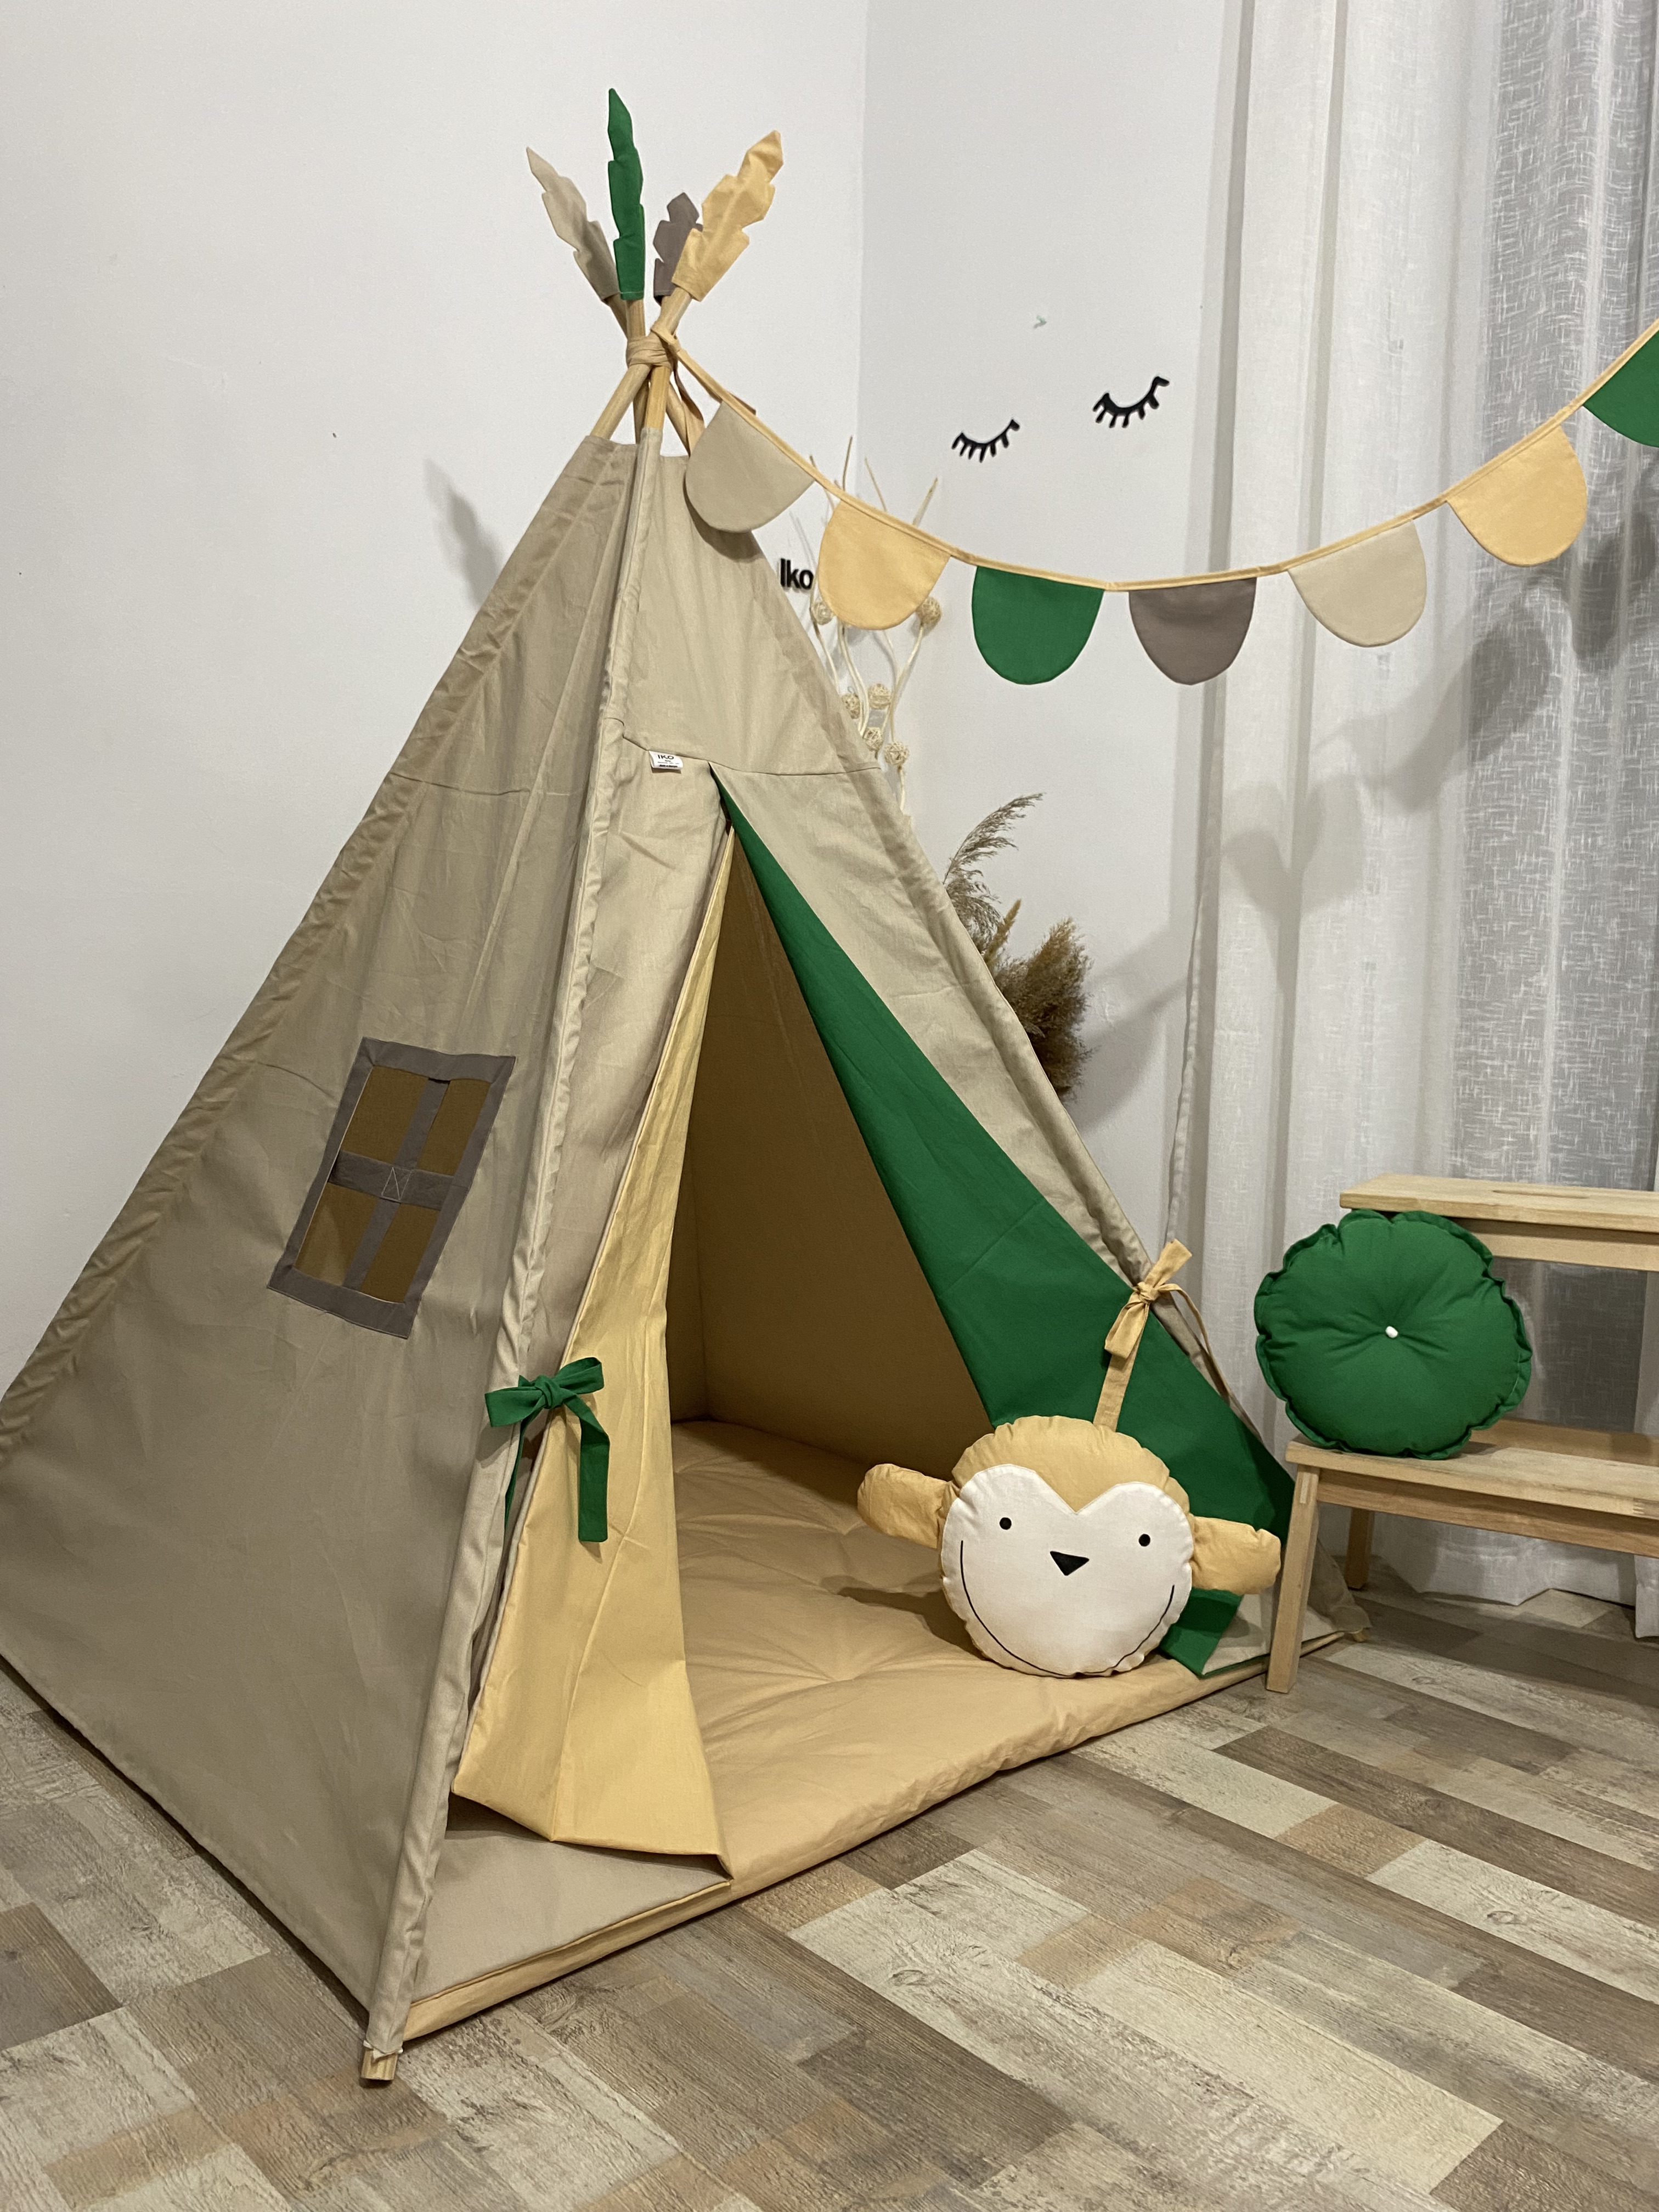 Kds' tent with colorful skirts and a pillow with a monkey, pillow with monkey and hanging flags